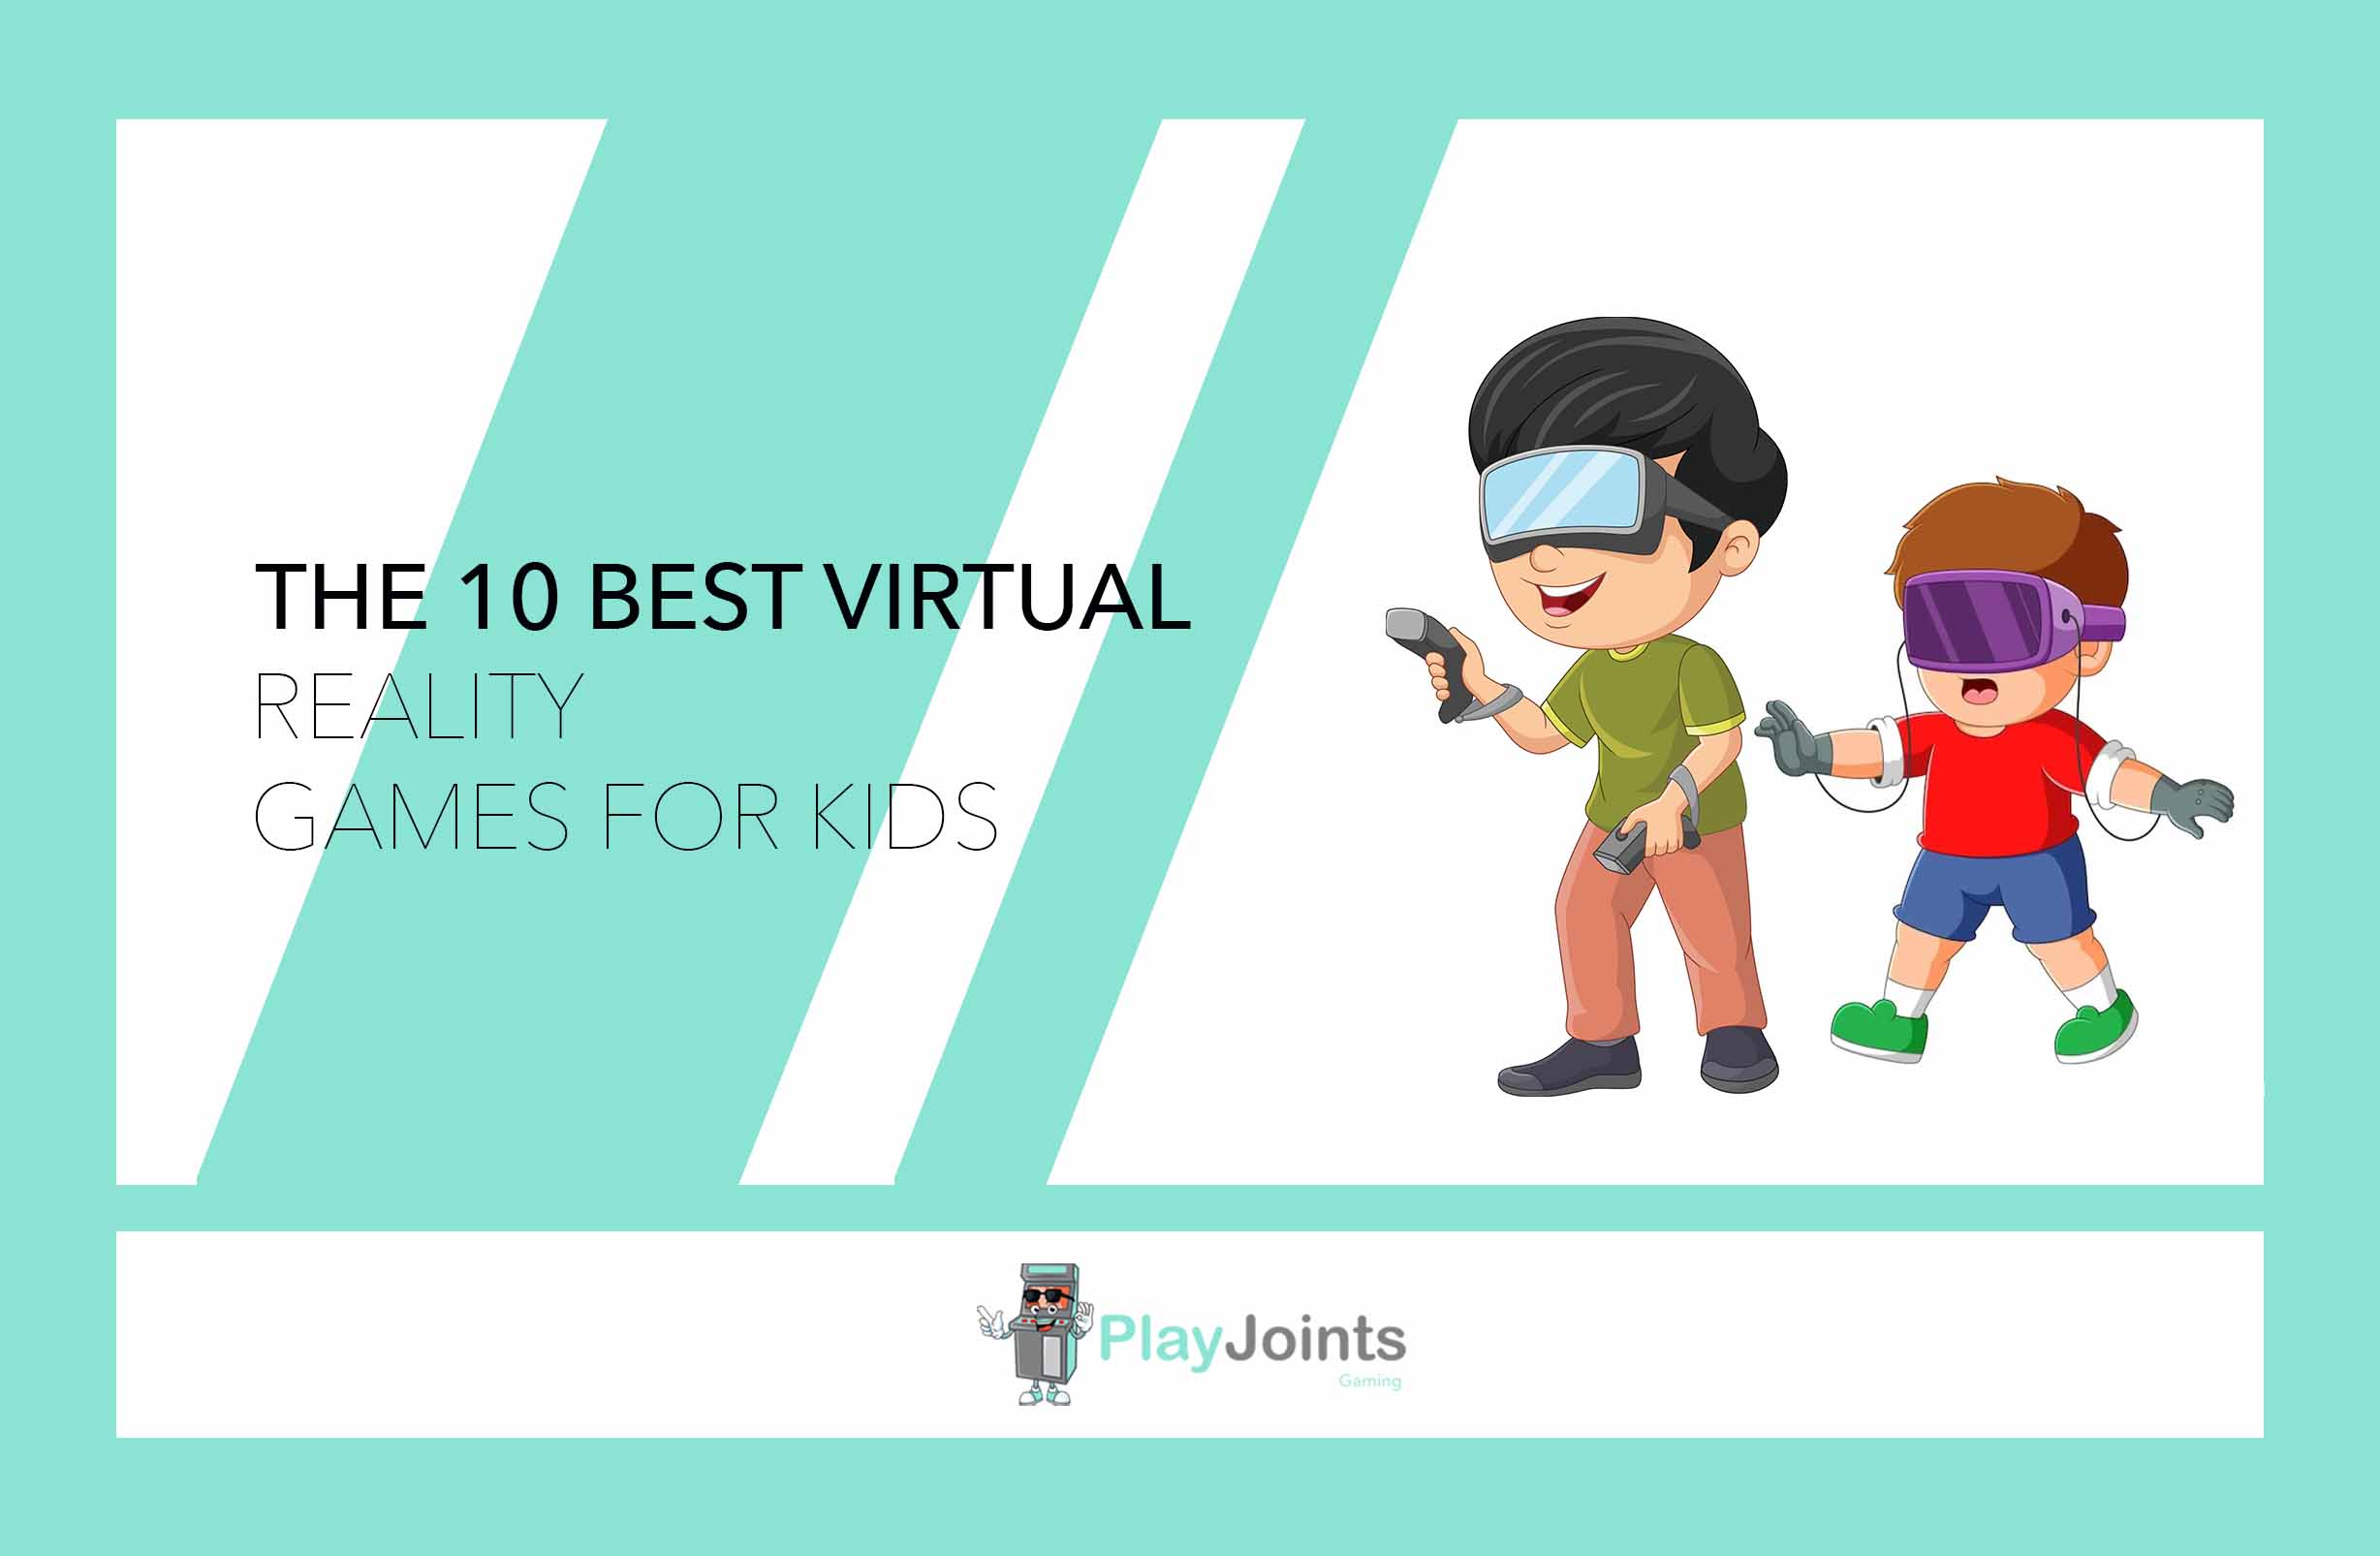 The 10 Best Virtual Reality Games For Kids